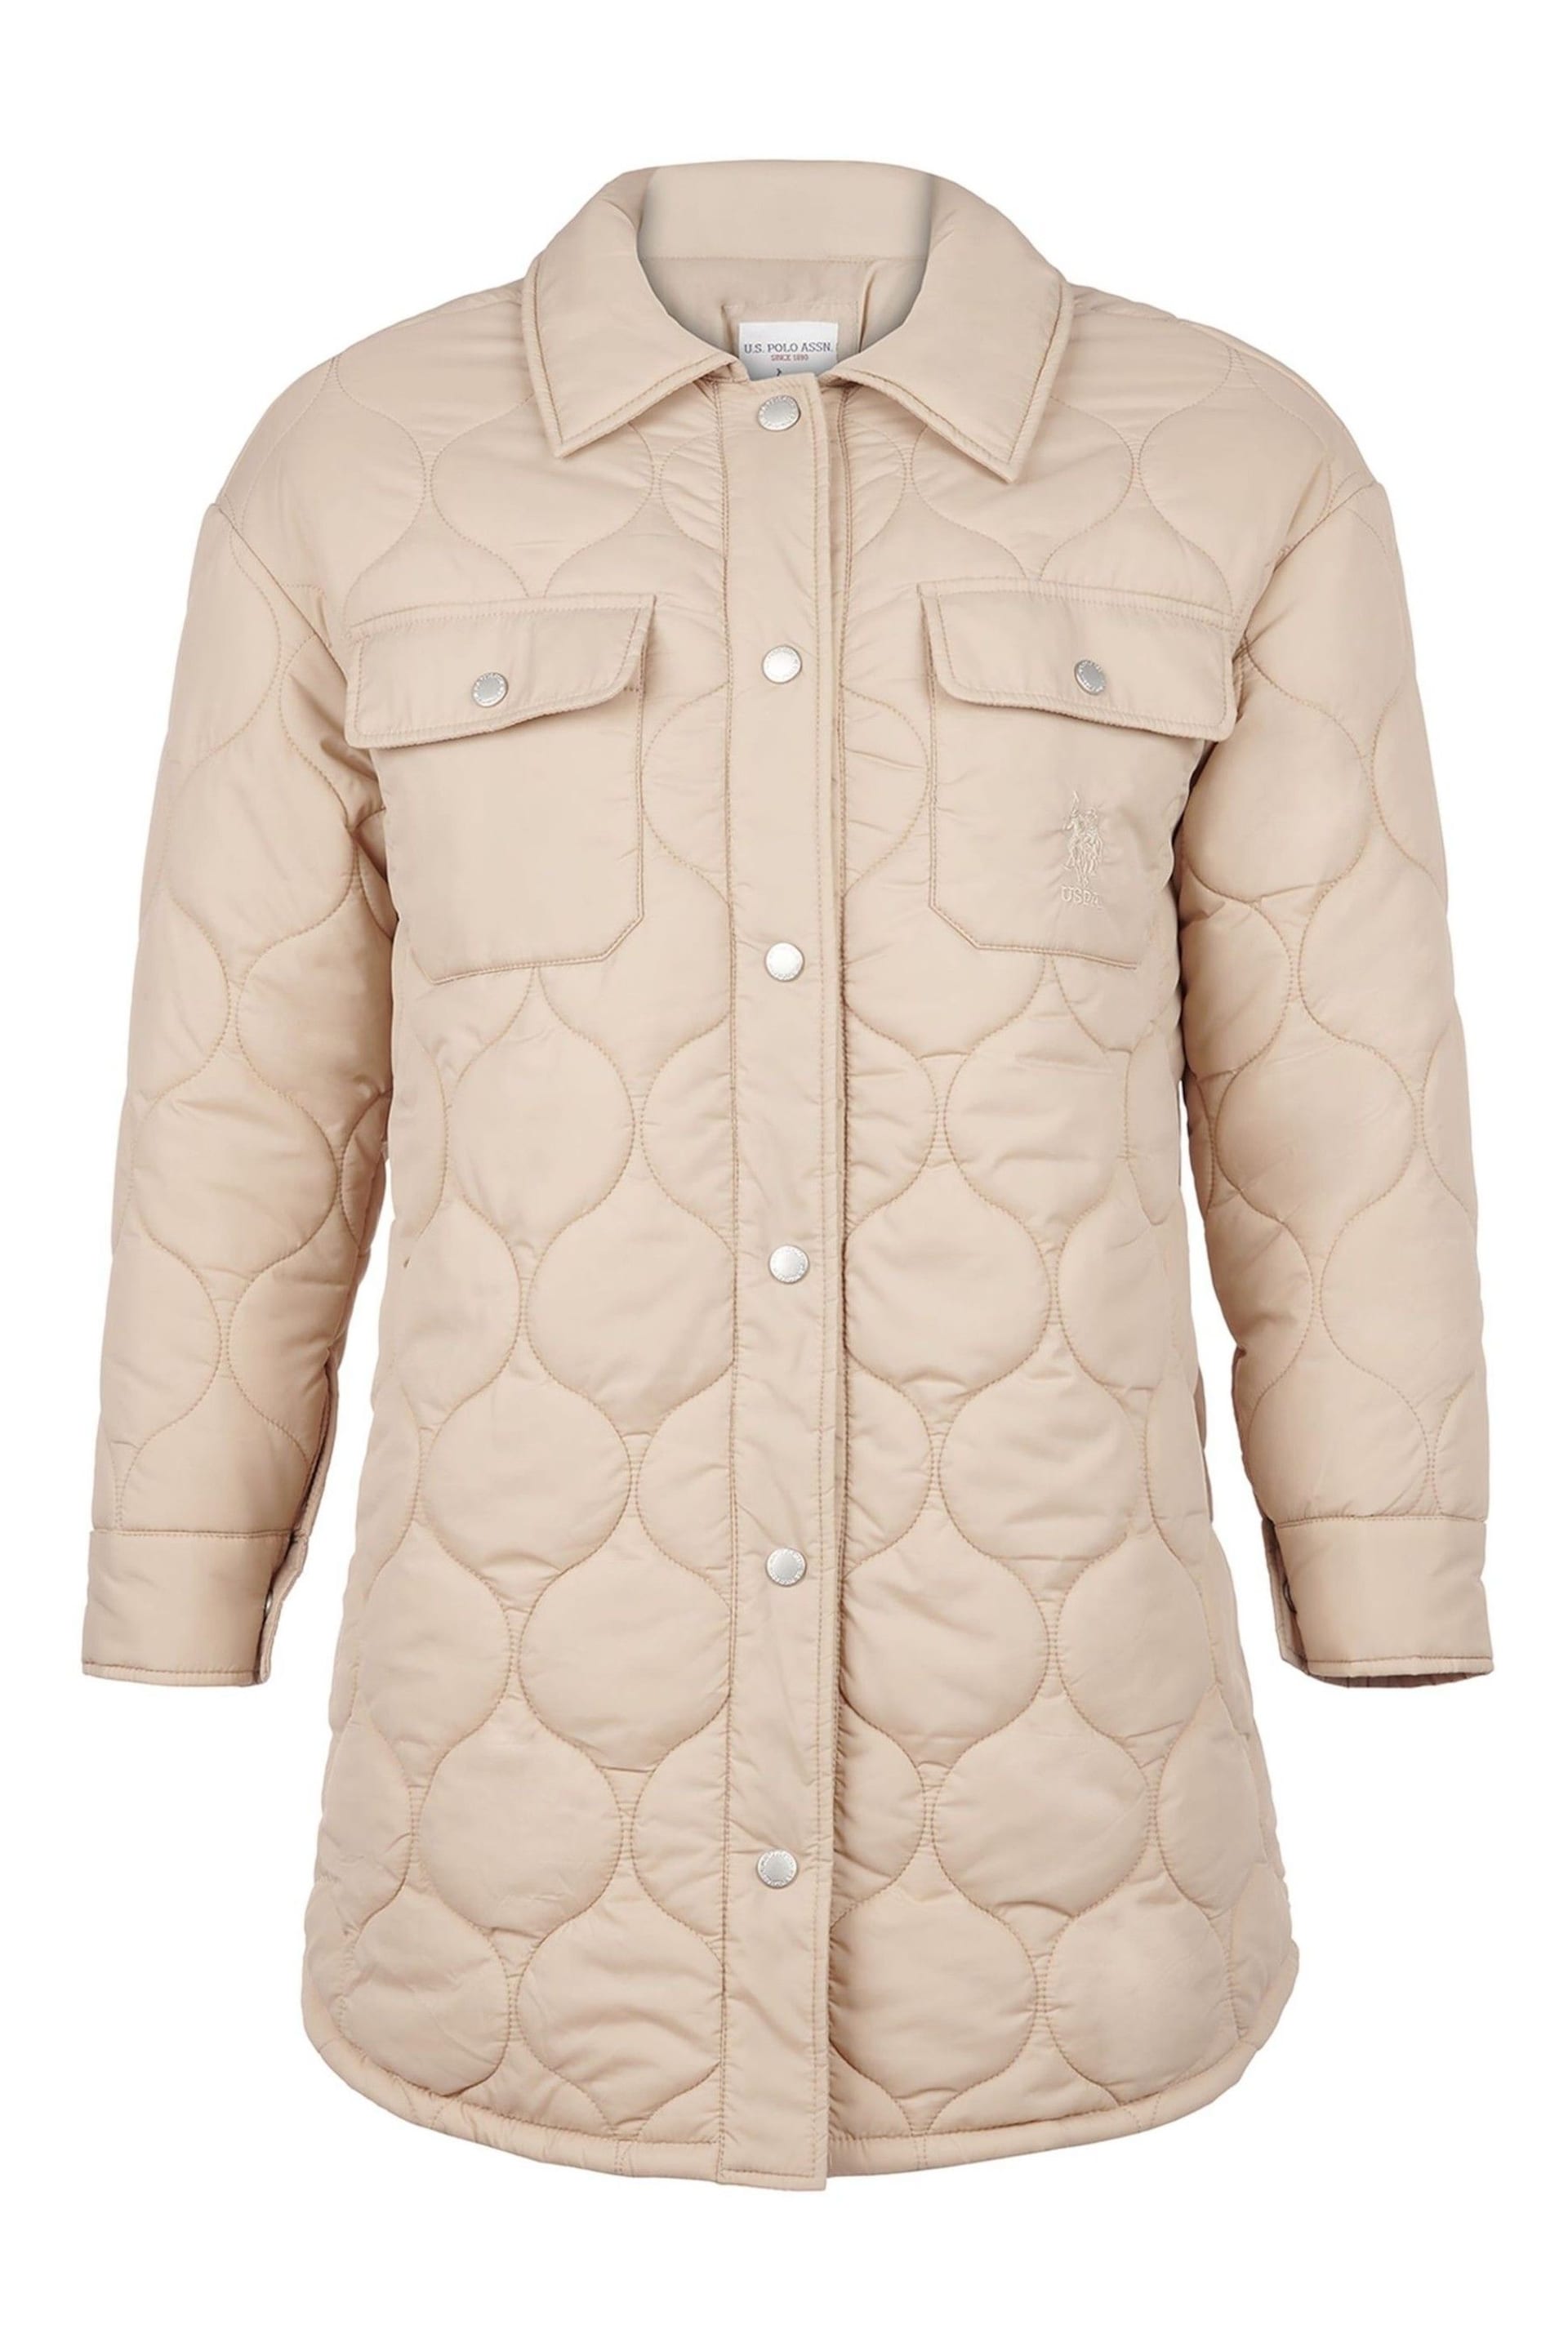 U.S. Polo Assn. Womens Quilted Overshirt - Image 4 of 4